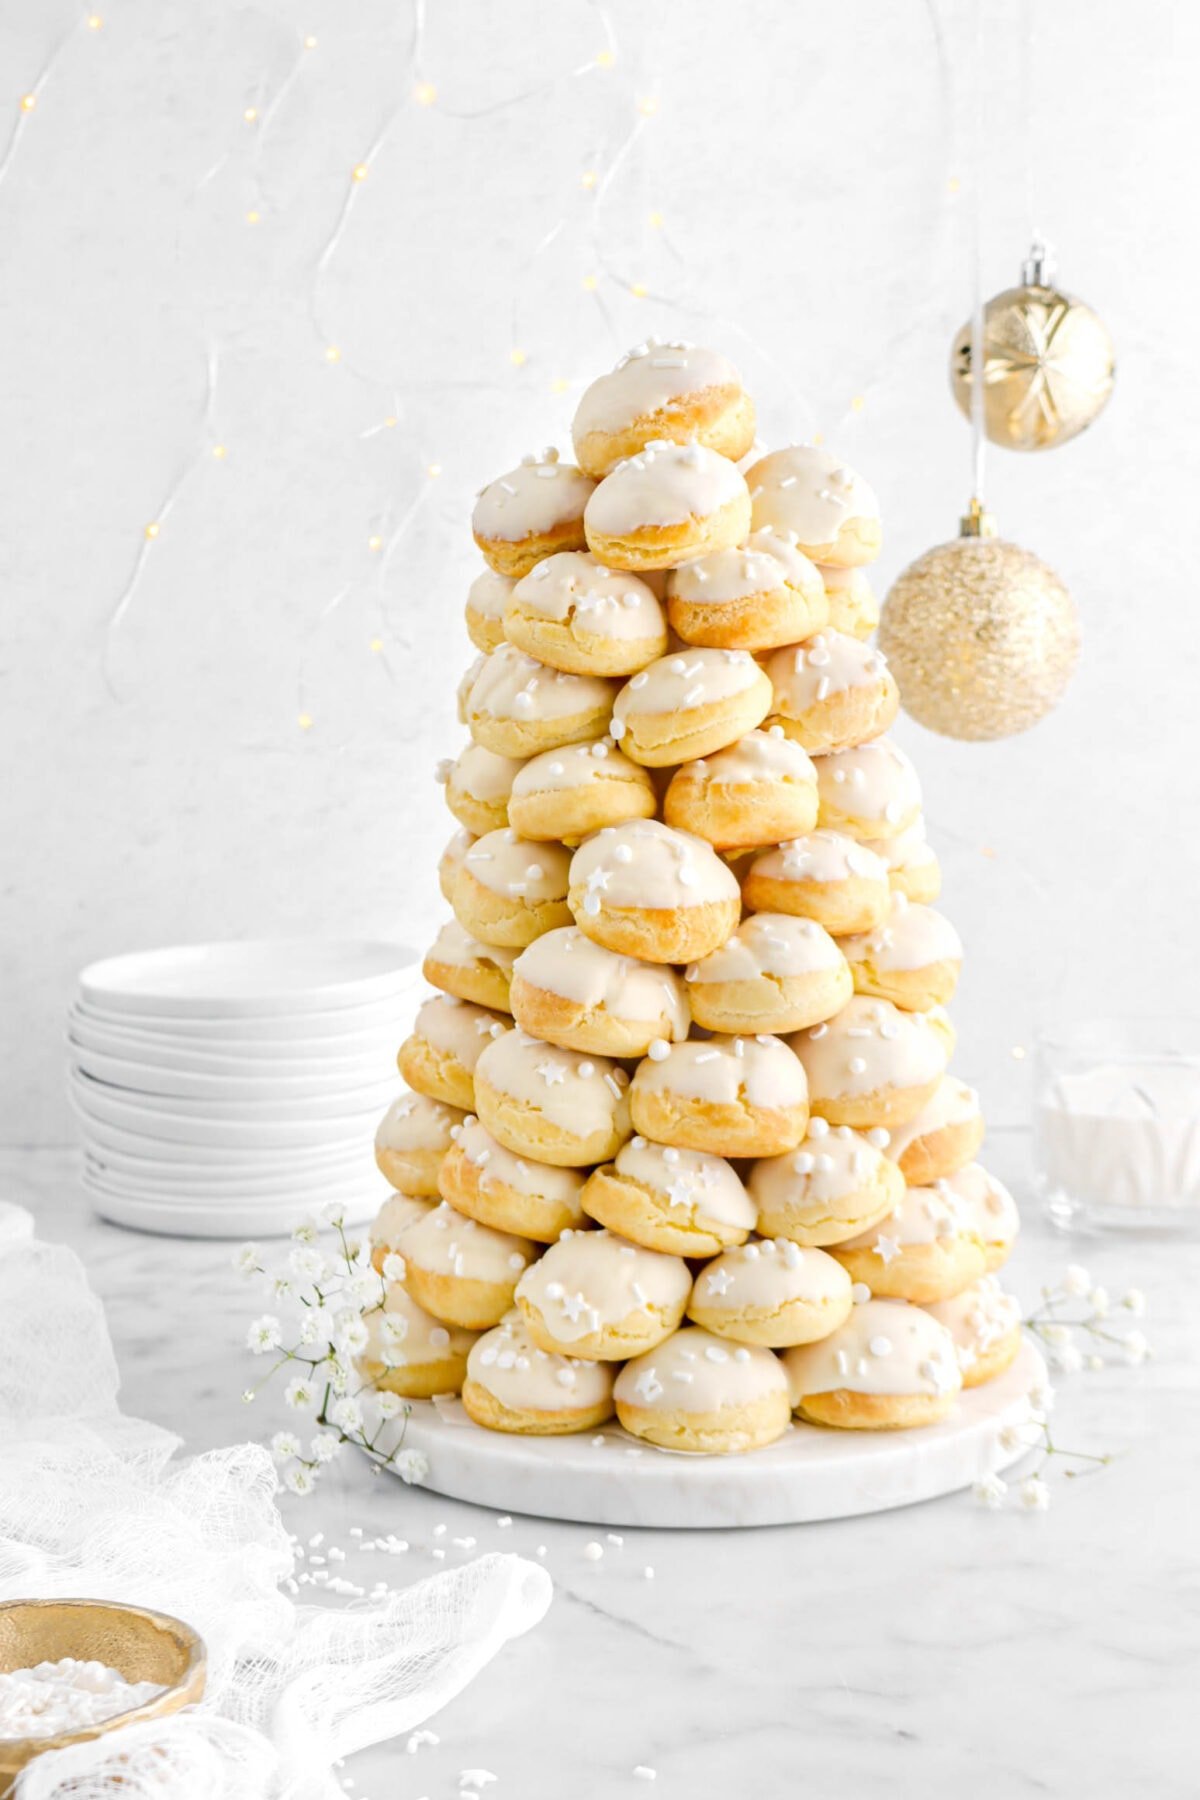 croquembouche off-center with two gold ornaments behind and stack of plates.